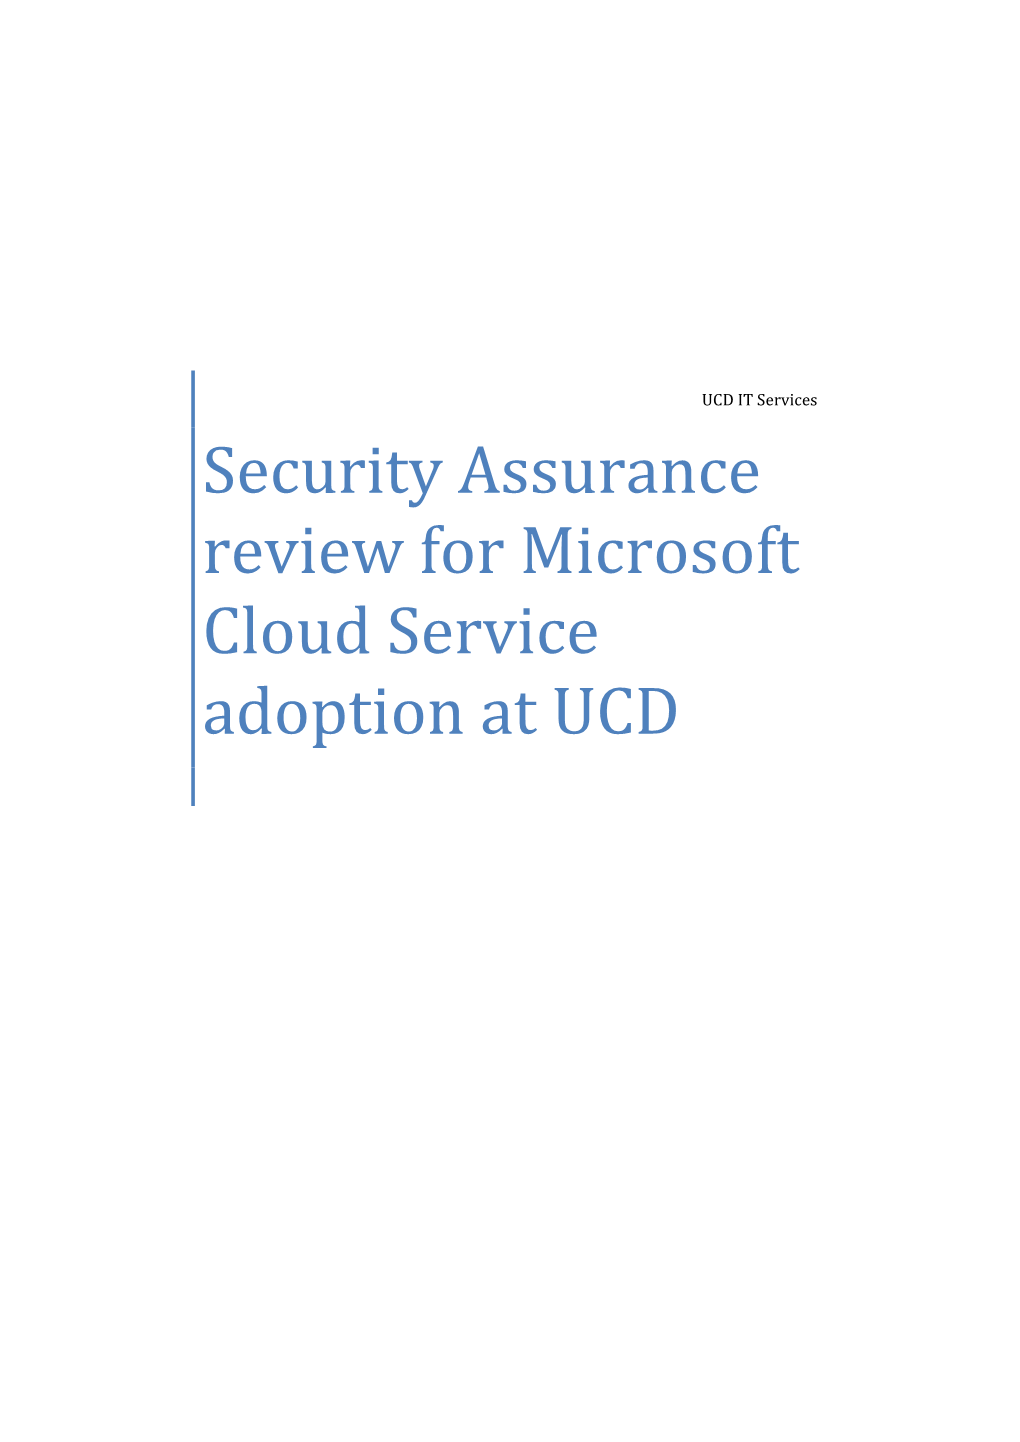 Security Assurance Review for Microsoft Cloud Service Adoption at UCD